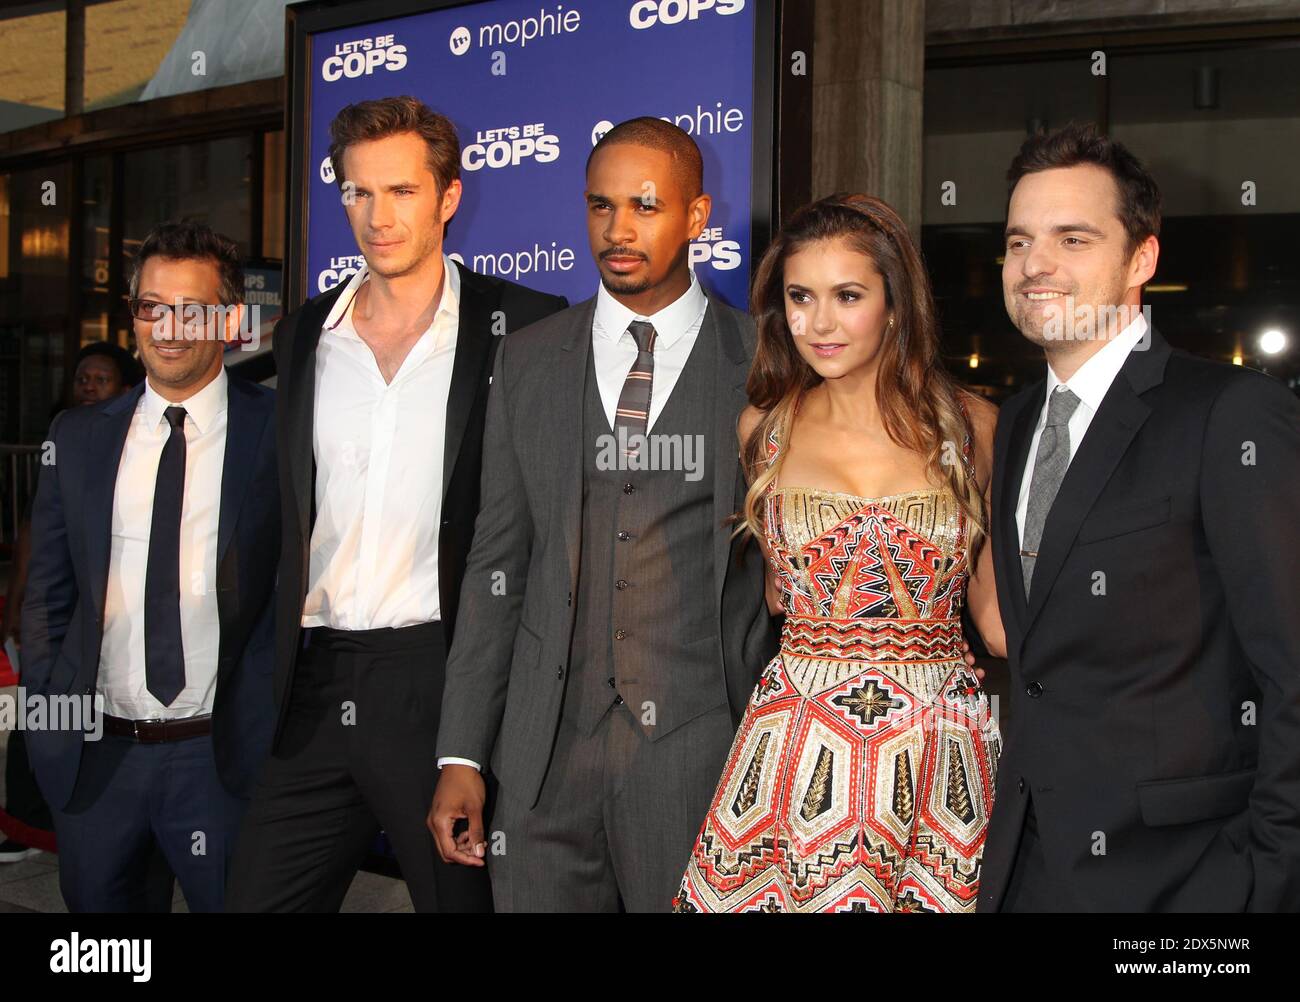 Luke Greenfield, James D'Arcy, Damon Wayans Jr., Nina Dobrev, Jake Johnson, Twentieth Century Fox film premiere for Let's Be Cops at the Cinerama Dome in Hollywood, Los Angeles, CA, USA, August 7, 2014. (Pictured: Luke Greenfield, James D'Arcy, Damon Wayans Jr., Nina Dobrev, Jake Johnson). Photo by Baxter/ABACAPRESS.COM Stock Photo